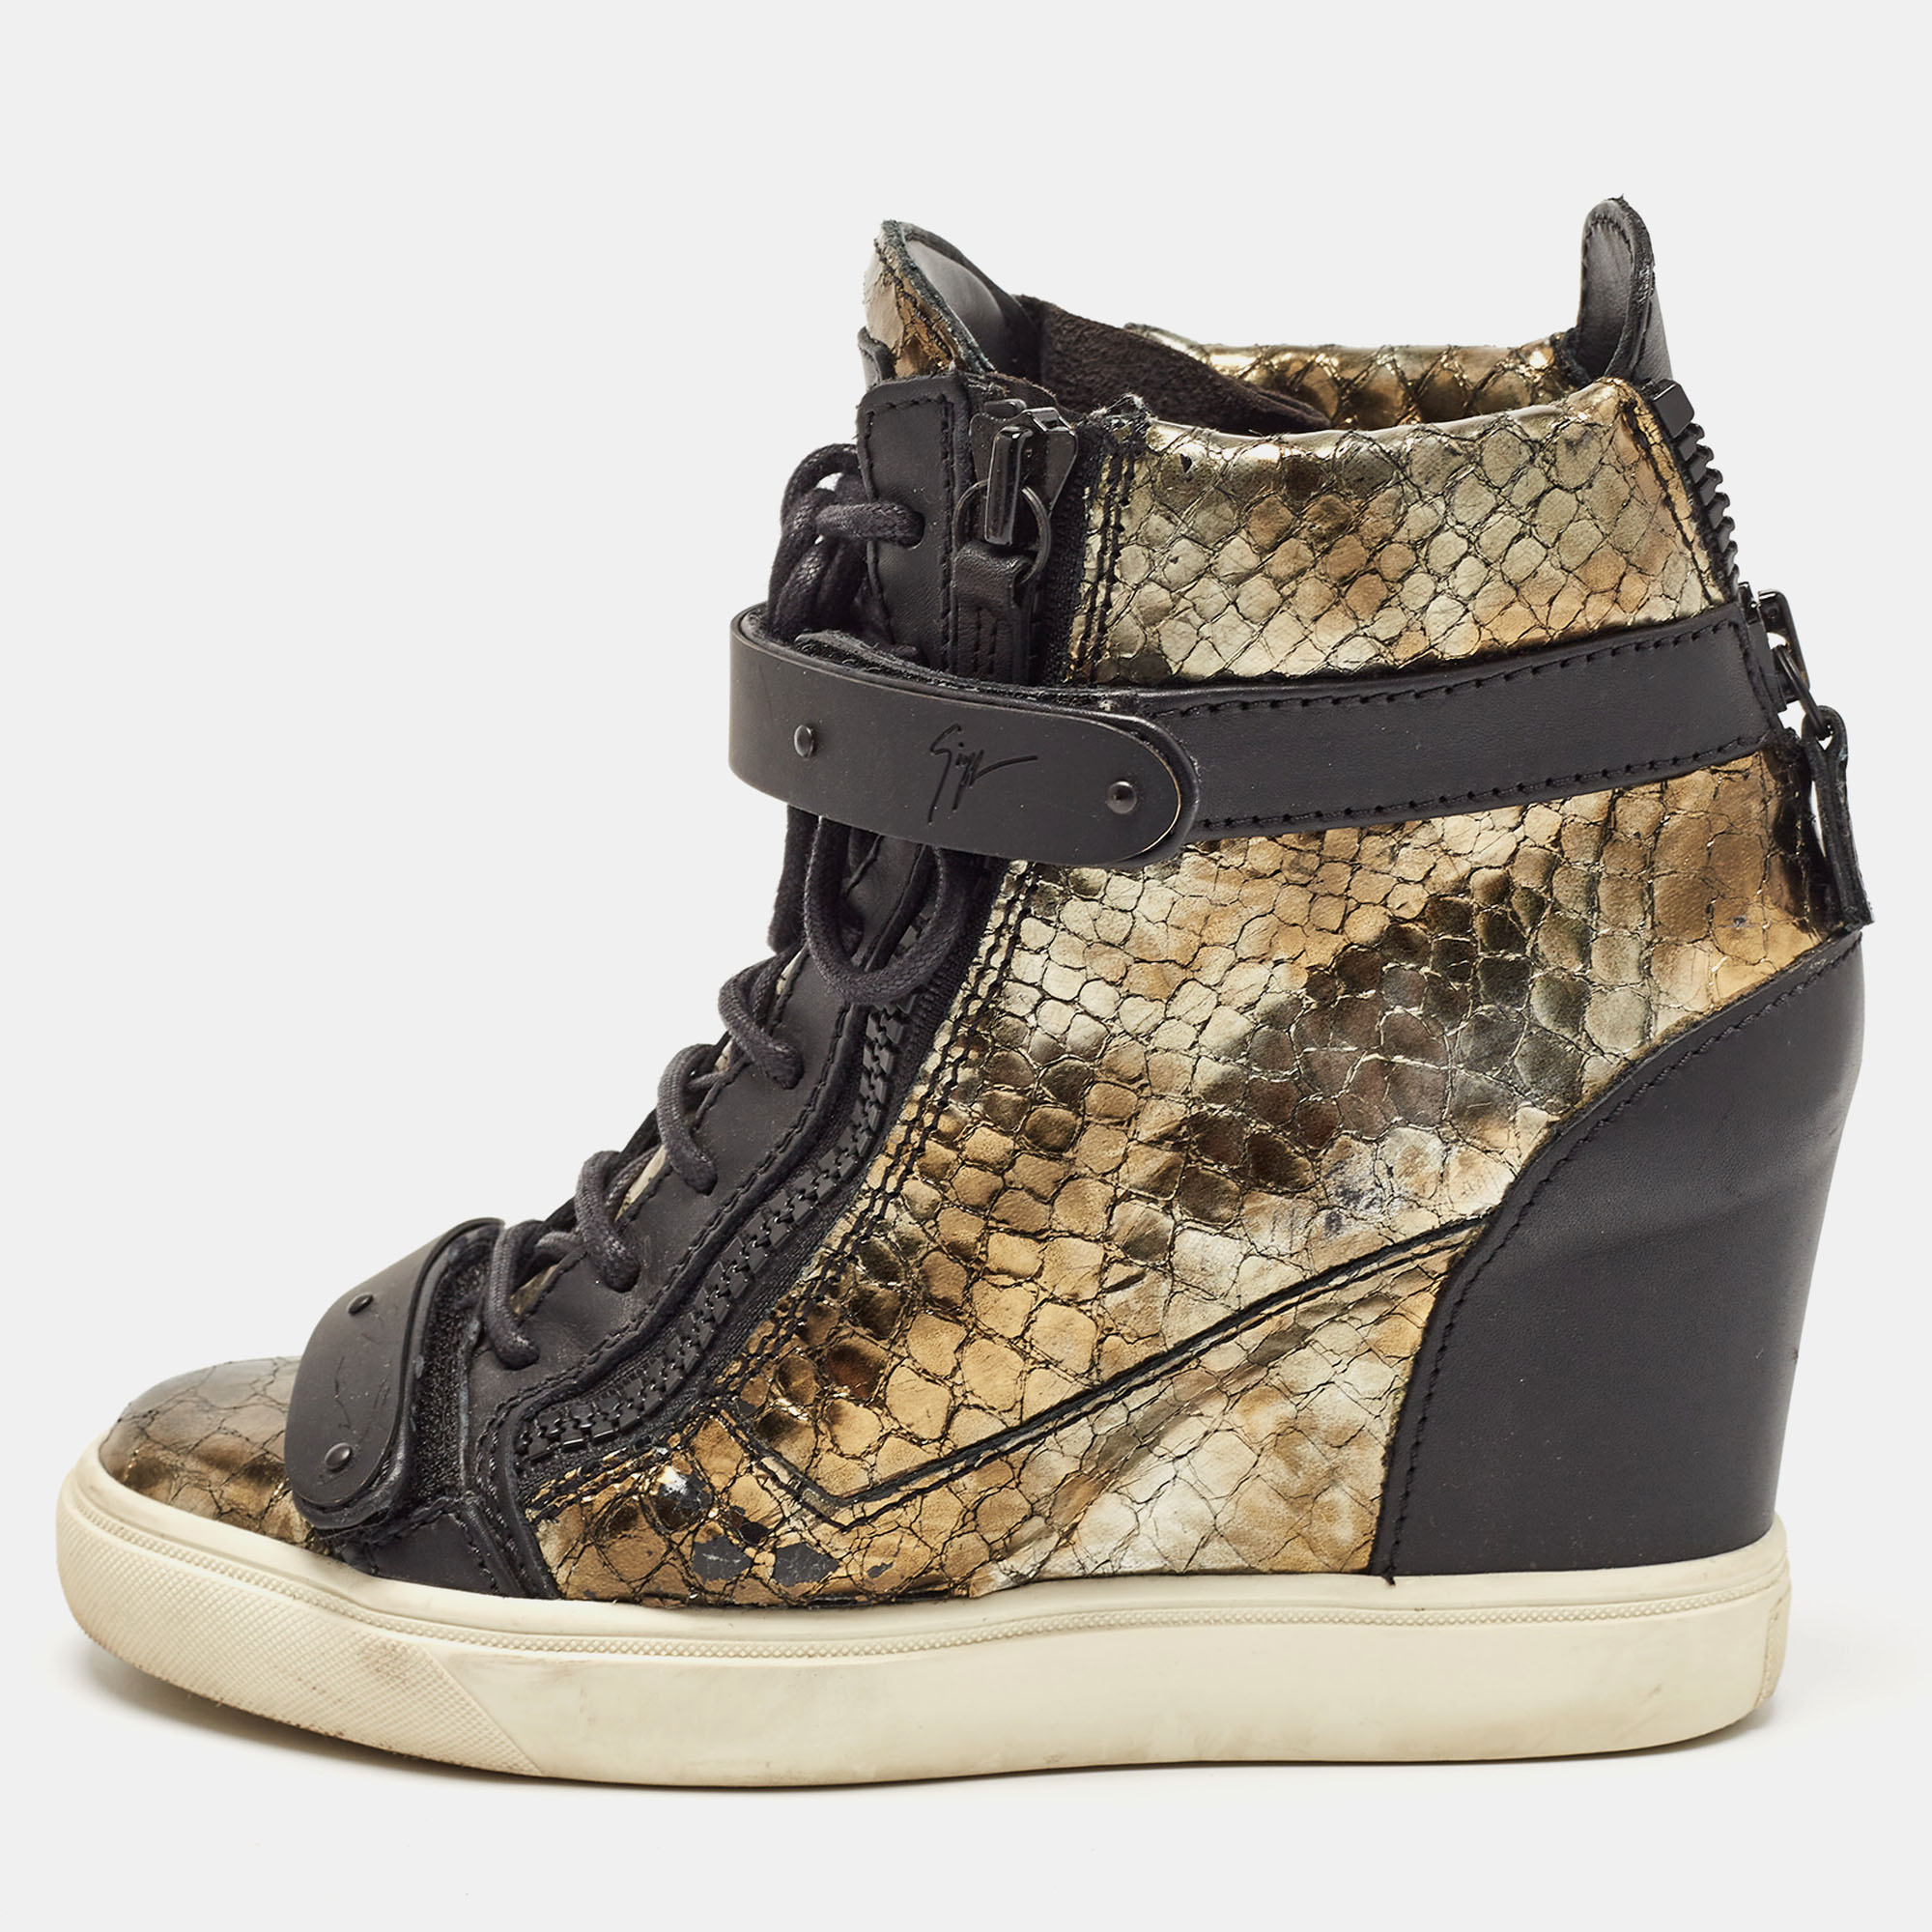 Pre-owned Giuseppe Zanotti Metallic Python Embossed Wedge Trainers Size 38